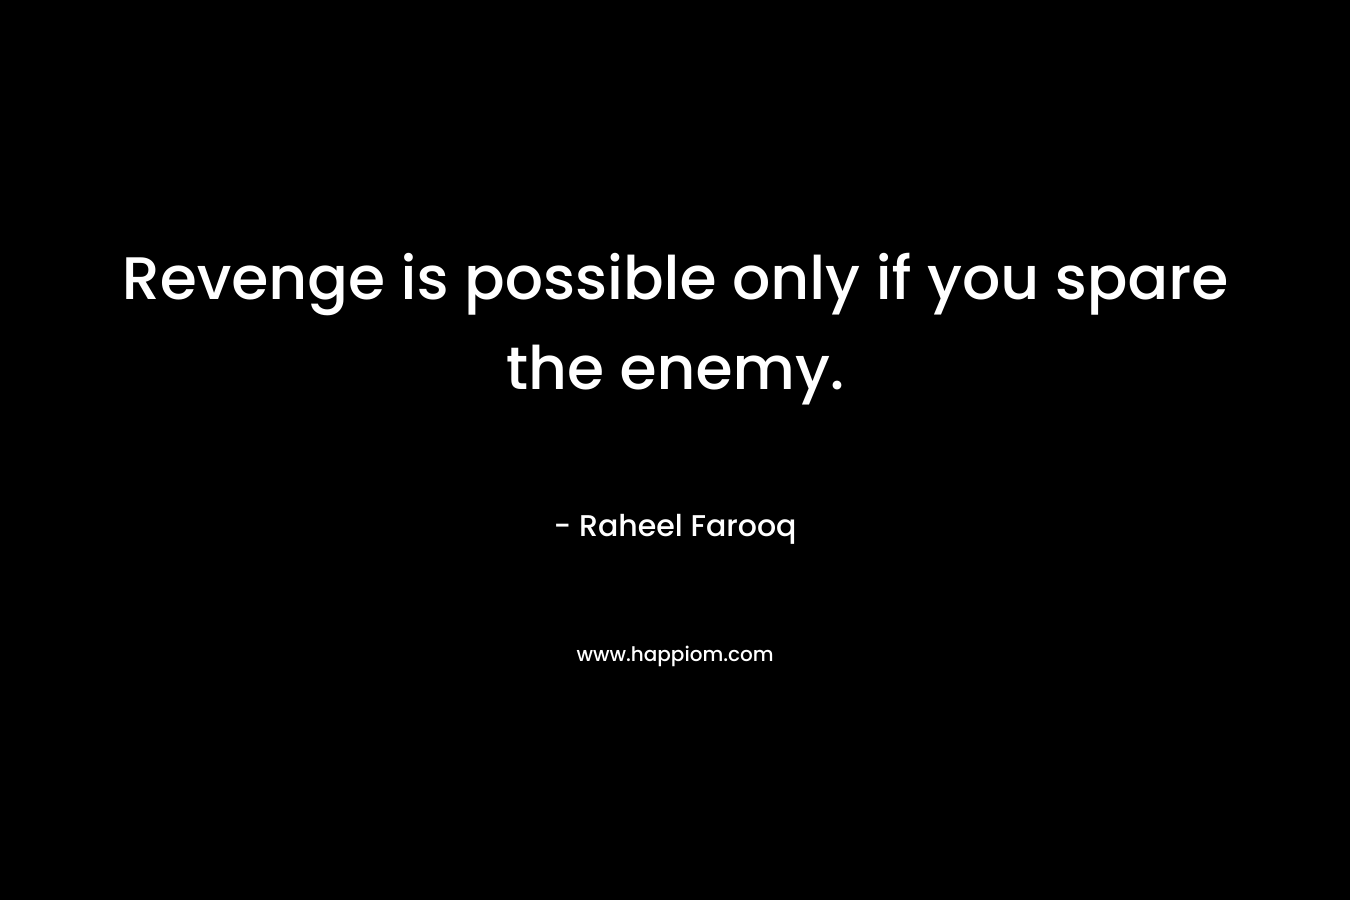 Revenge is possible only if you spare the enemy. – Raheel Farooq